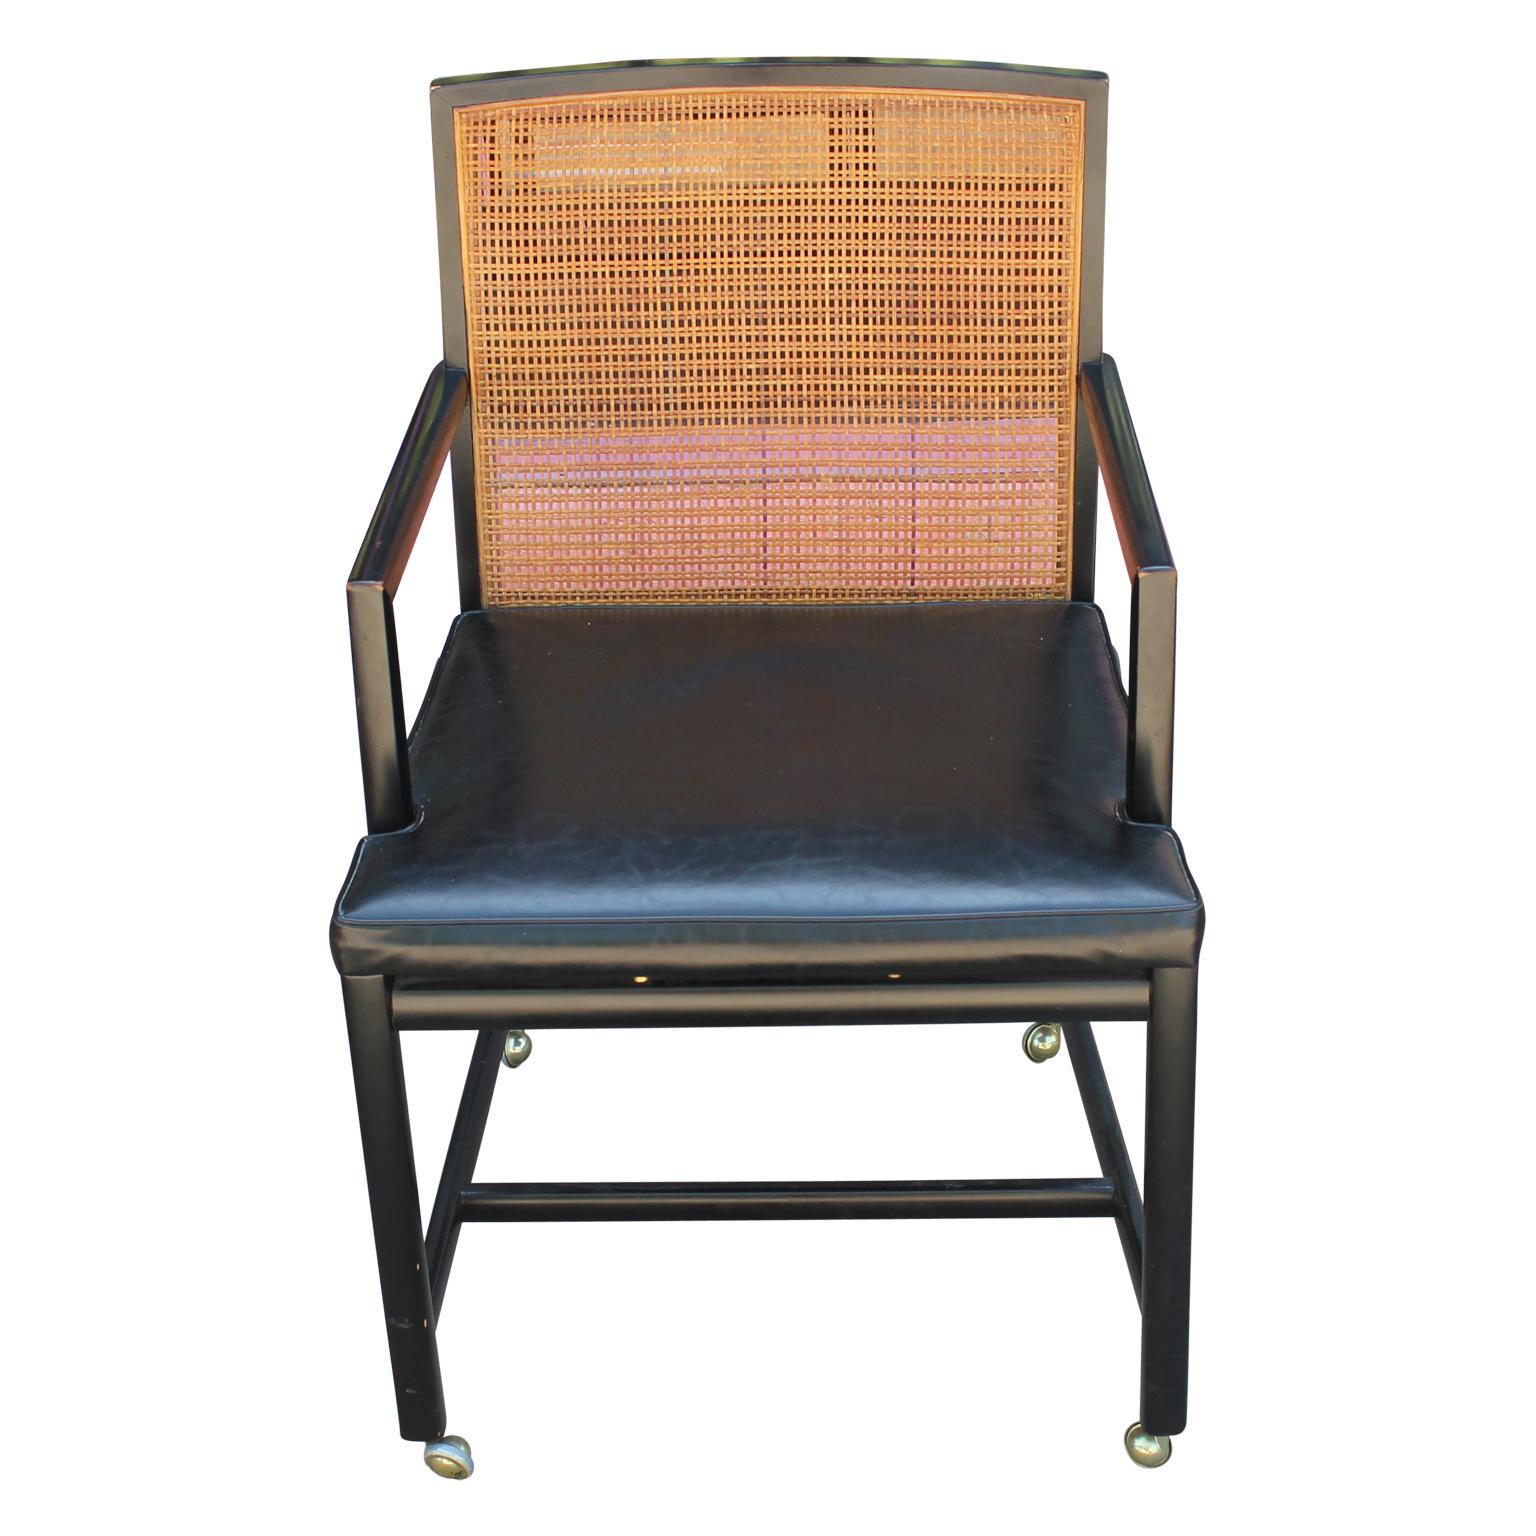 Wonderful set of four dining chairs by Michael Taylor for Baker Furniture and New World Collection. They are lacquered black and are cane backed. We recommend recaning the chair backs. We currently have two arm chairs and two side chairs in this